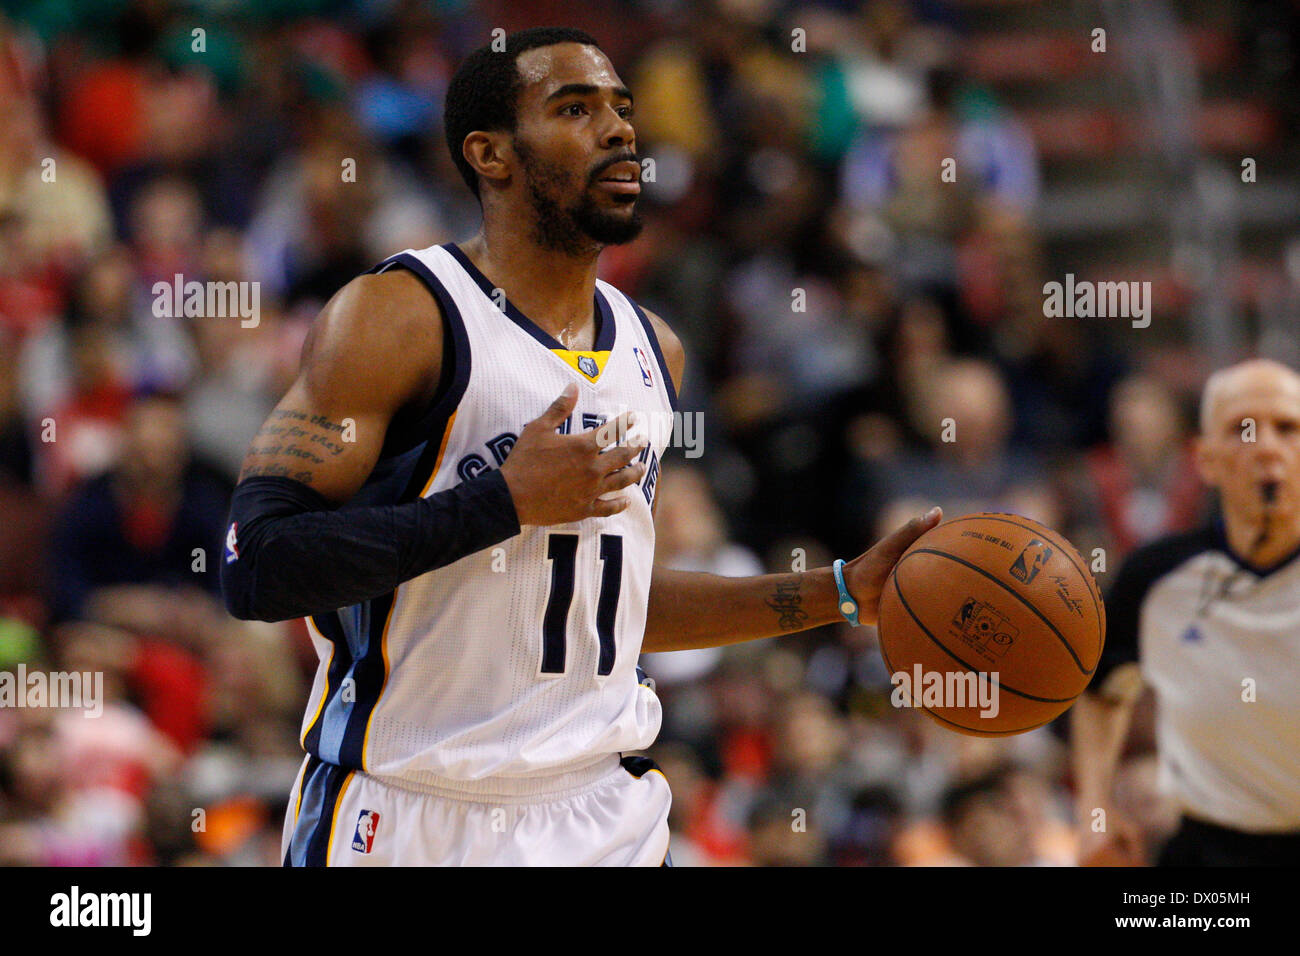 100+] Mike Conley Wallpapers